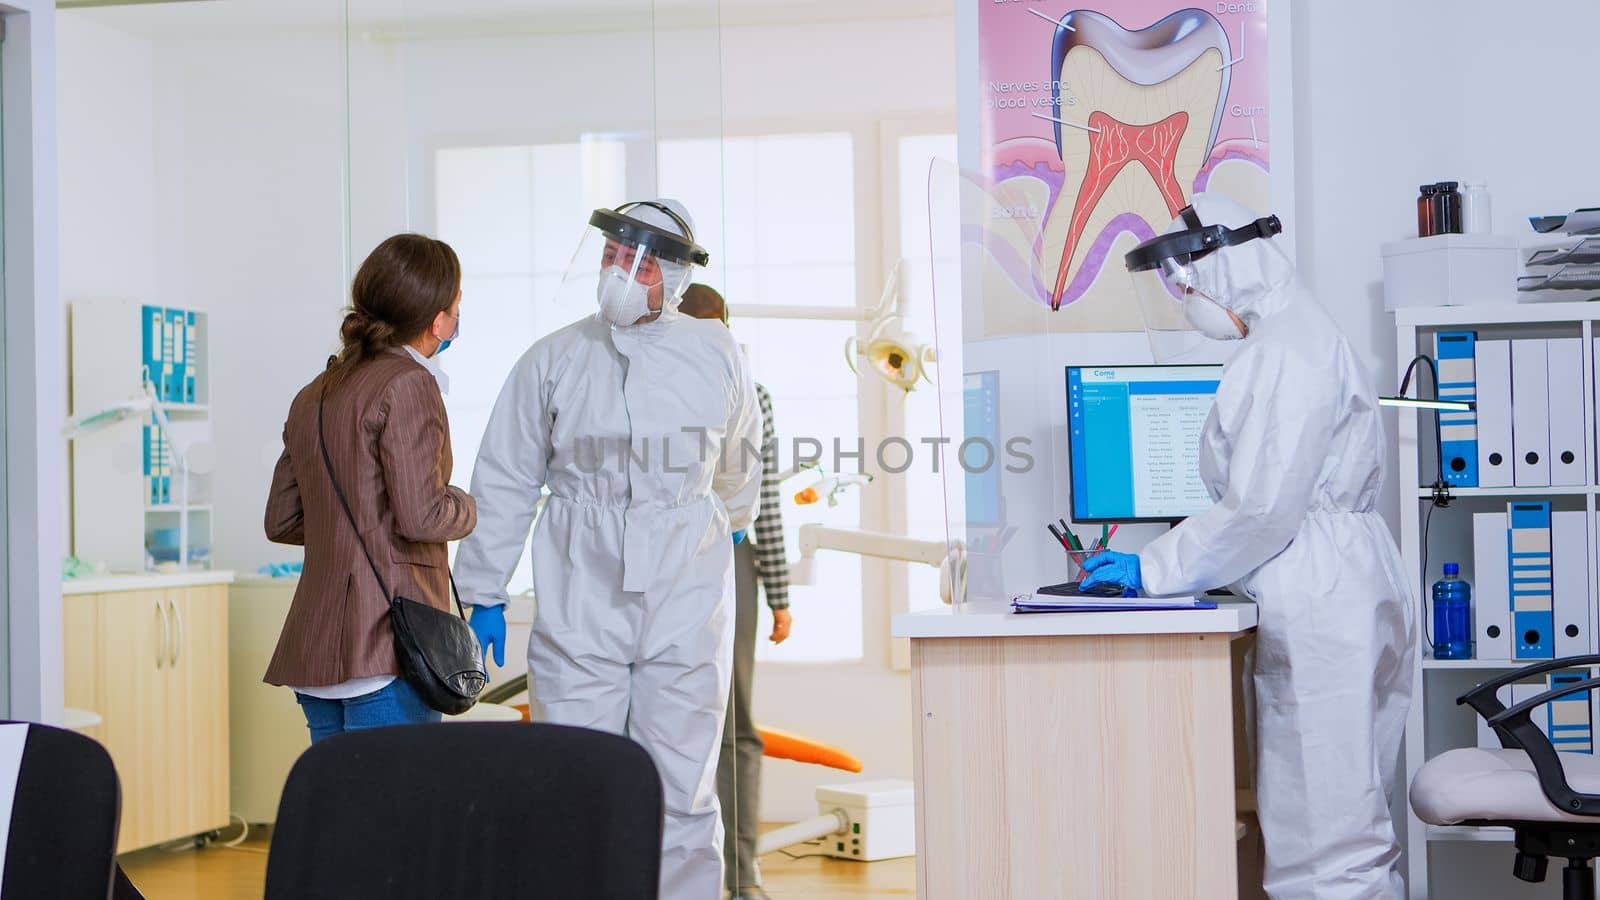 Lady wearing protection mask sitting on chair in reception area waiting stomatologist doctor with coverall during covid-19 pandemic. Concept of new normal dentist visit in coronavirus outbreak.